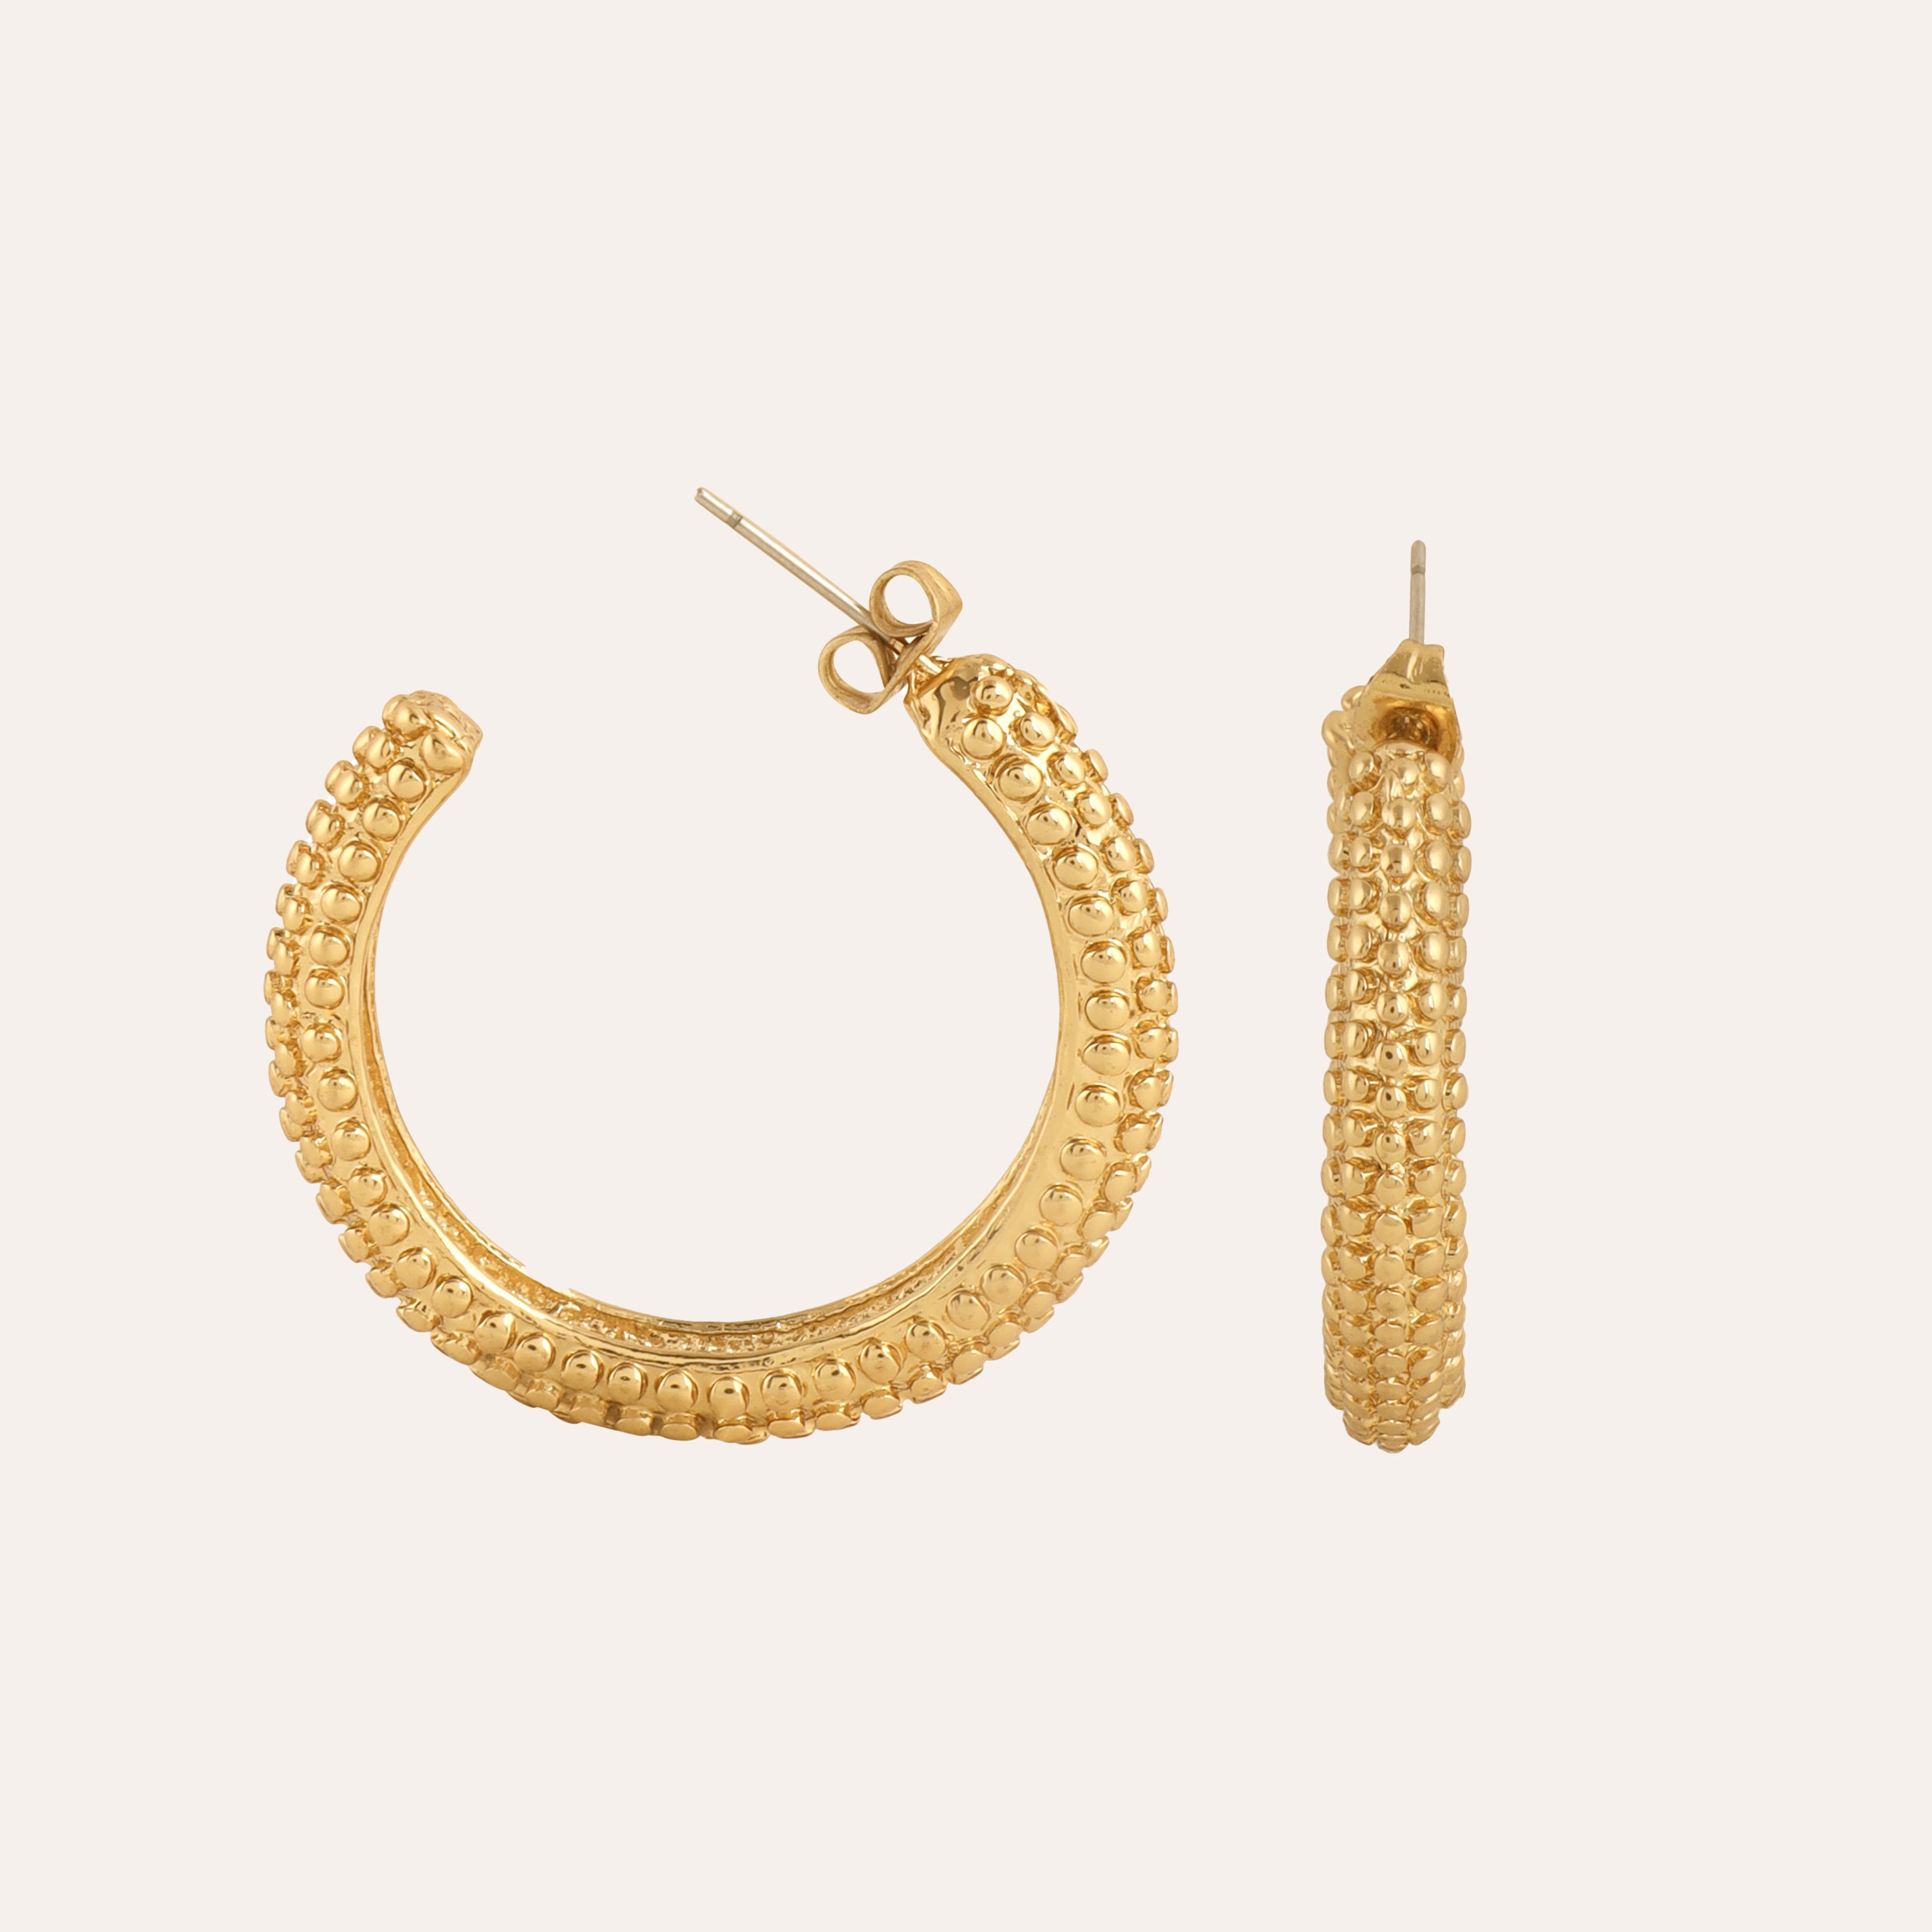 TFC Poppet Gold Plated Hoops Earrings-Discover daily wear gold earrings including stud earrings, hoop earrings, and pearl earrings, perfect as earrings for women and earrings for girls.Find the cheapest fashion jewellery which is anti-tarnis​h only at The Fun company